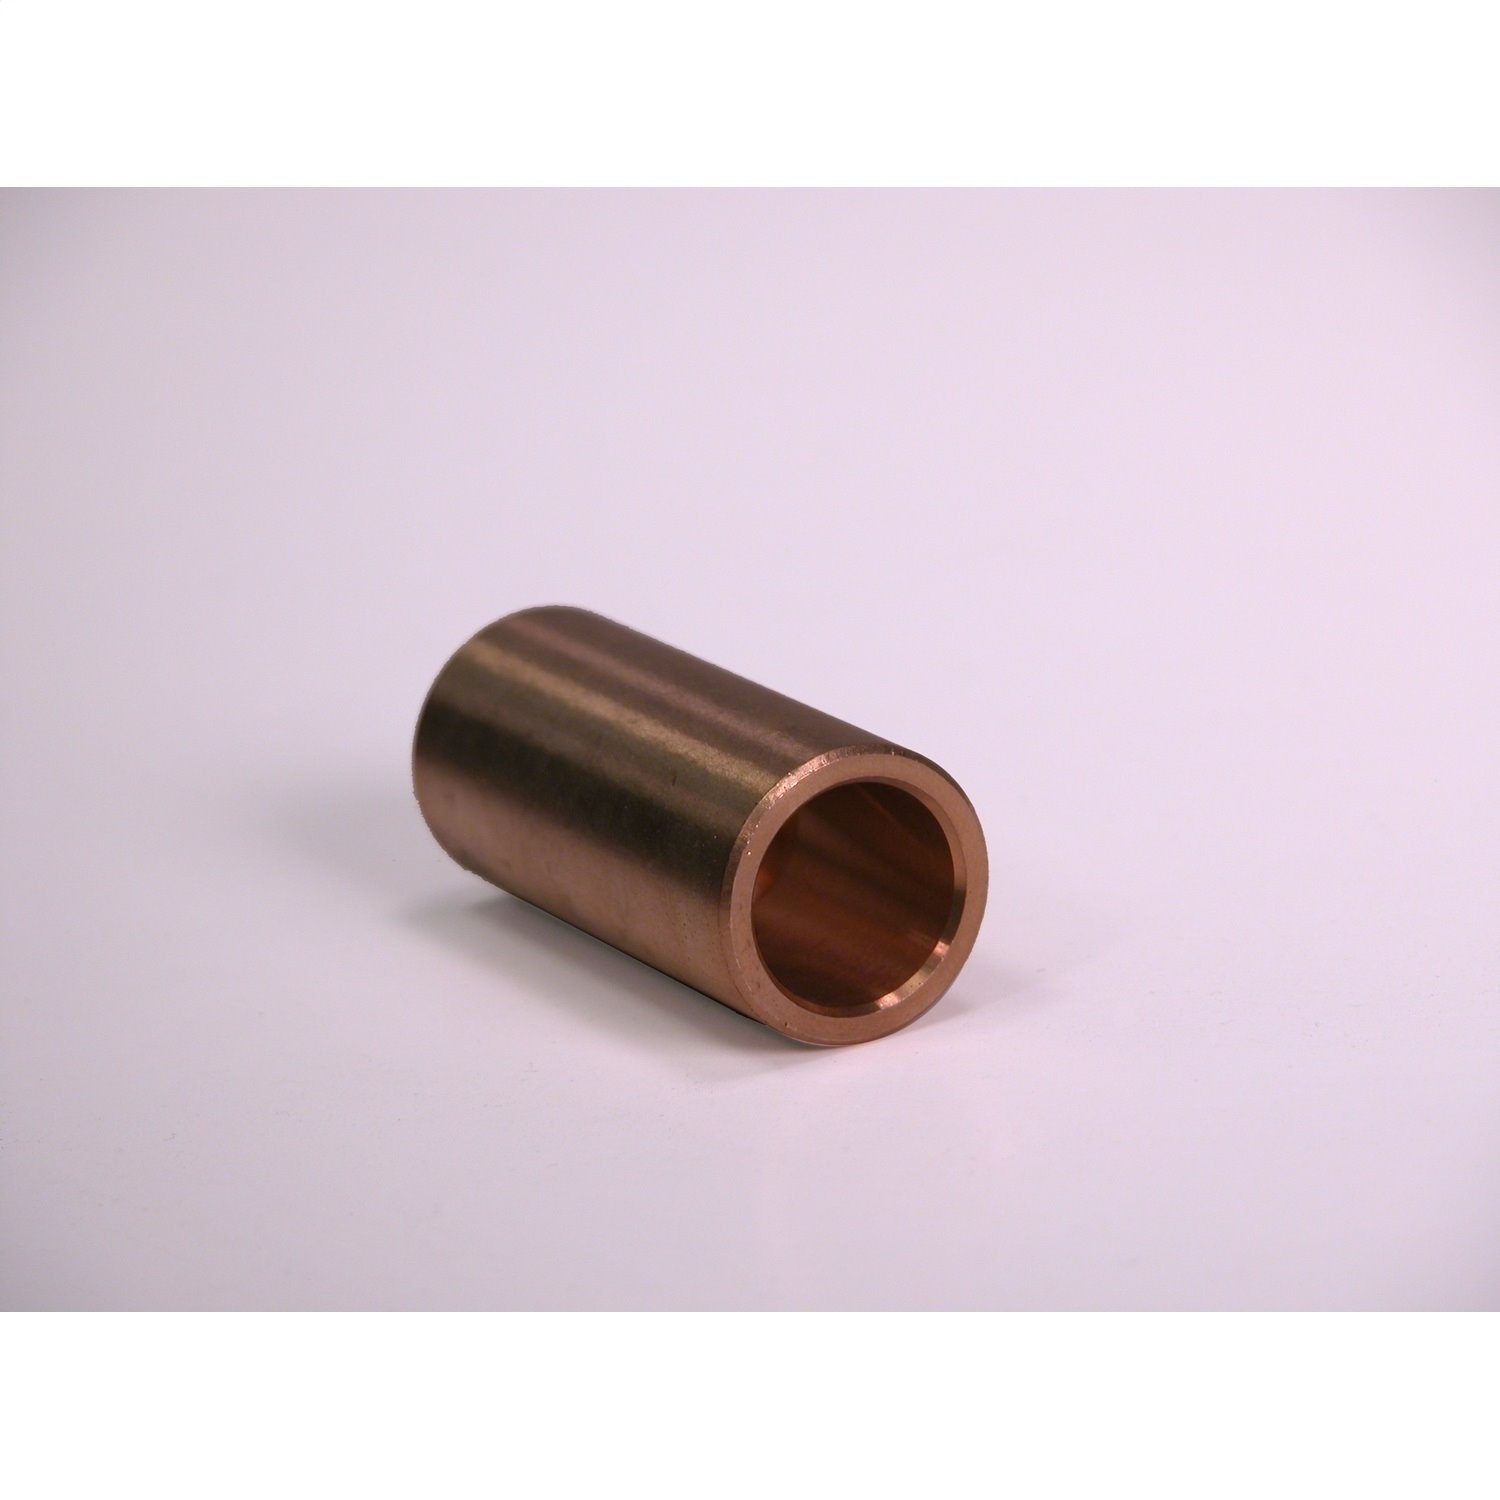 This factory-style bronze leaf spring pivot eye bushing from Omix-ADA fits the pivoting eyes on the front or rear leaf springs.